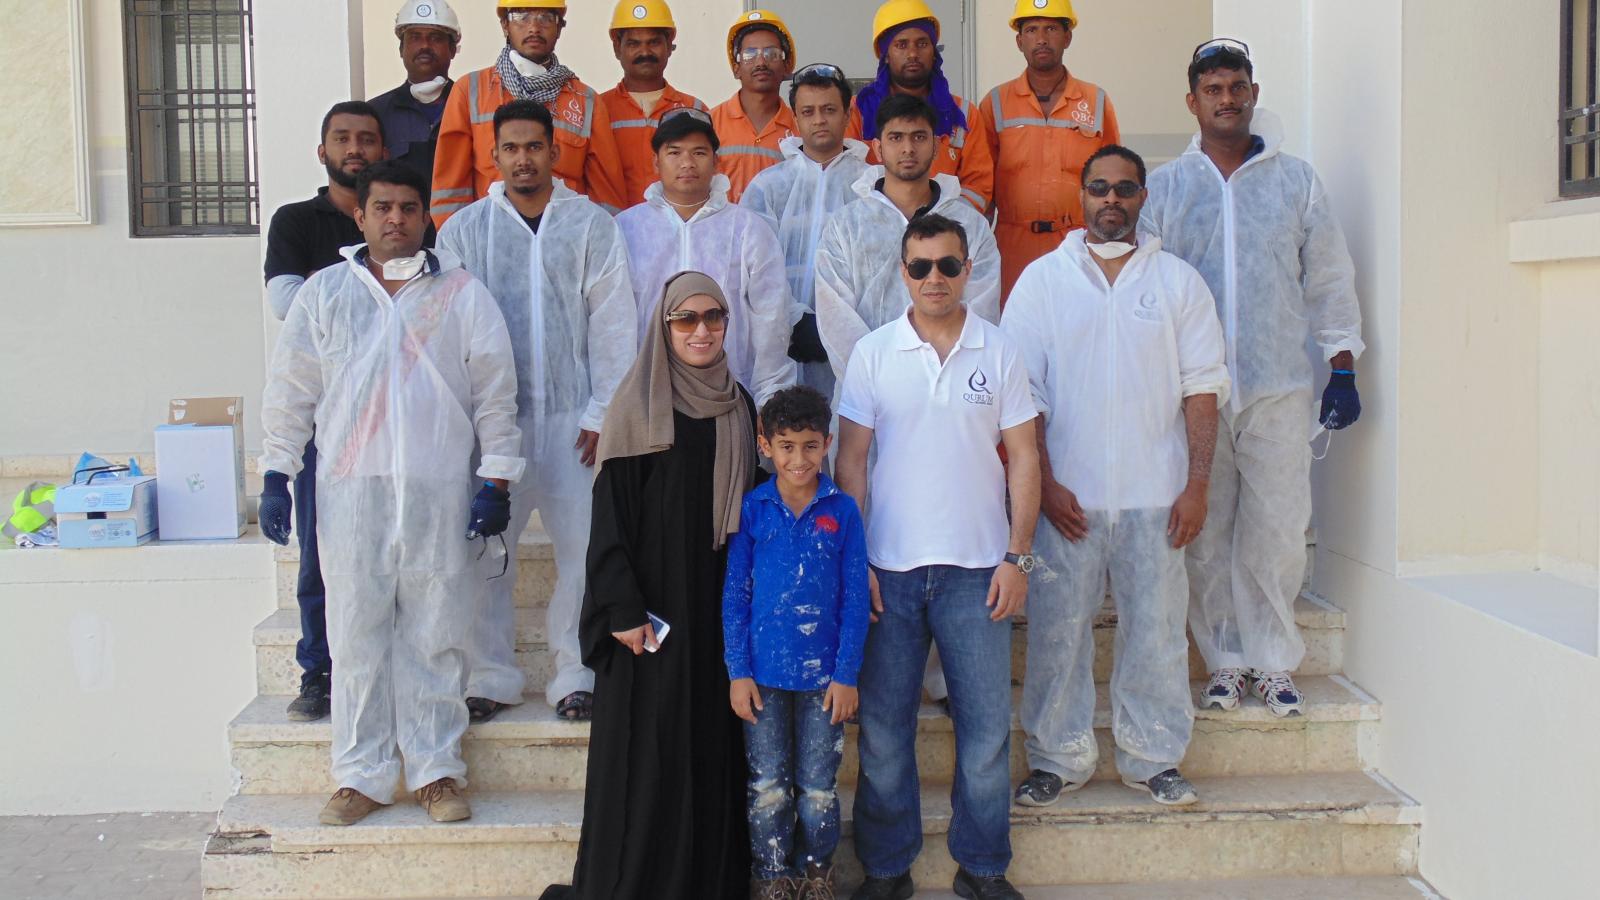 QBG Echoes Launches First Community Outreach Project From Al Khabourah